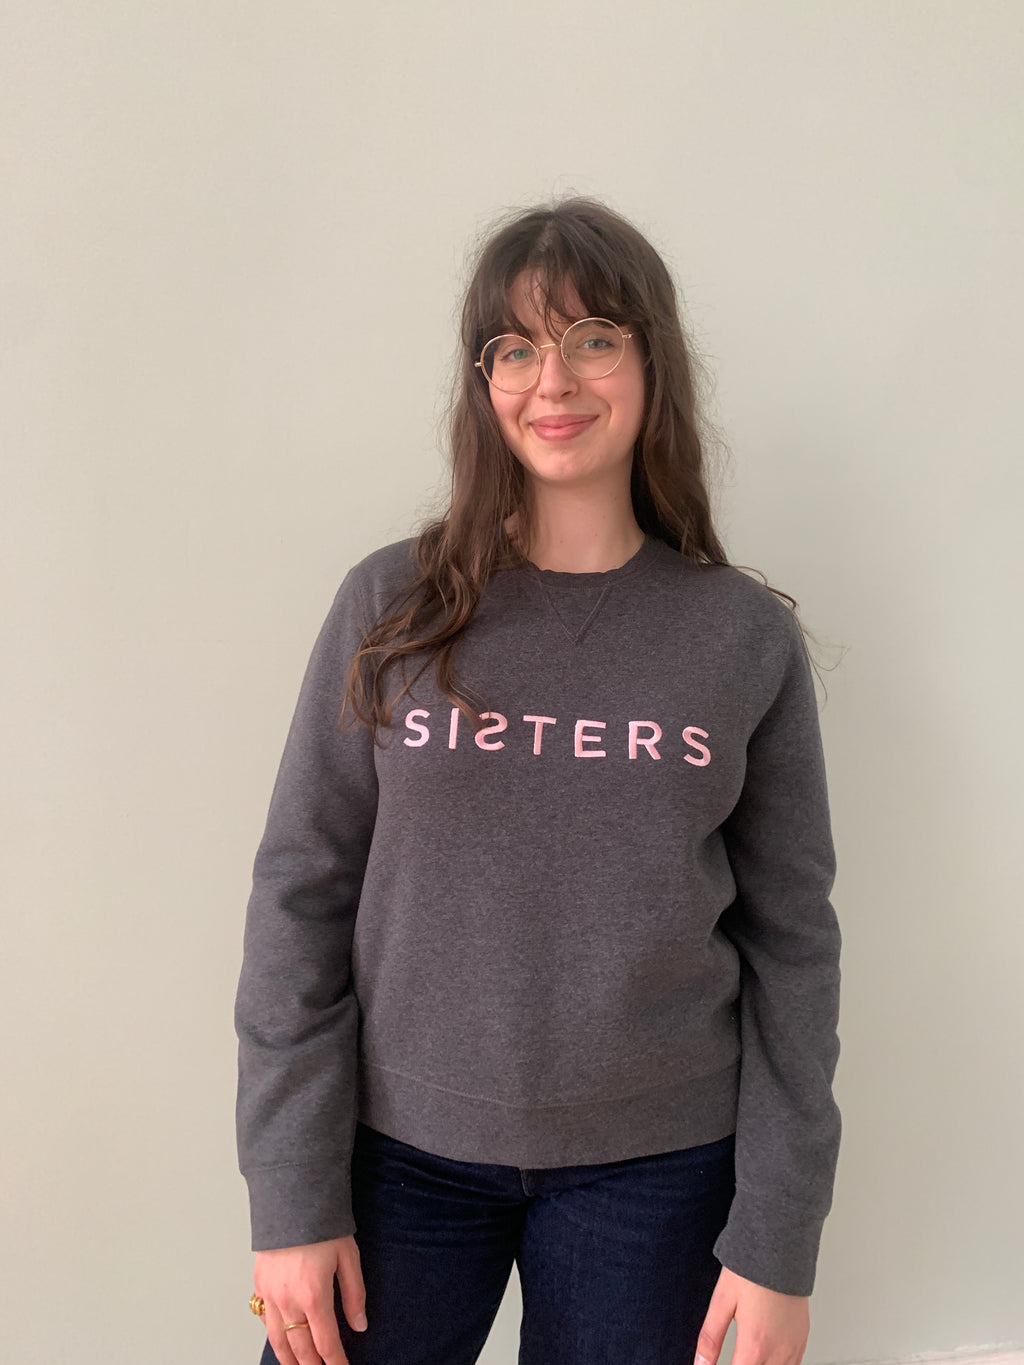 SISTERS embroidered sweatshirt X-Small SS103